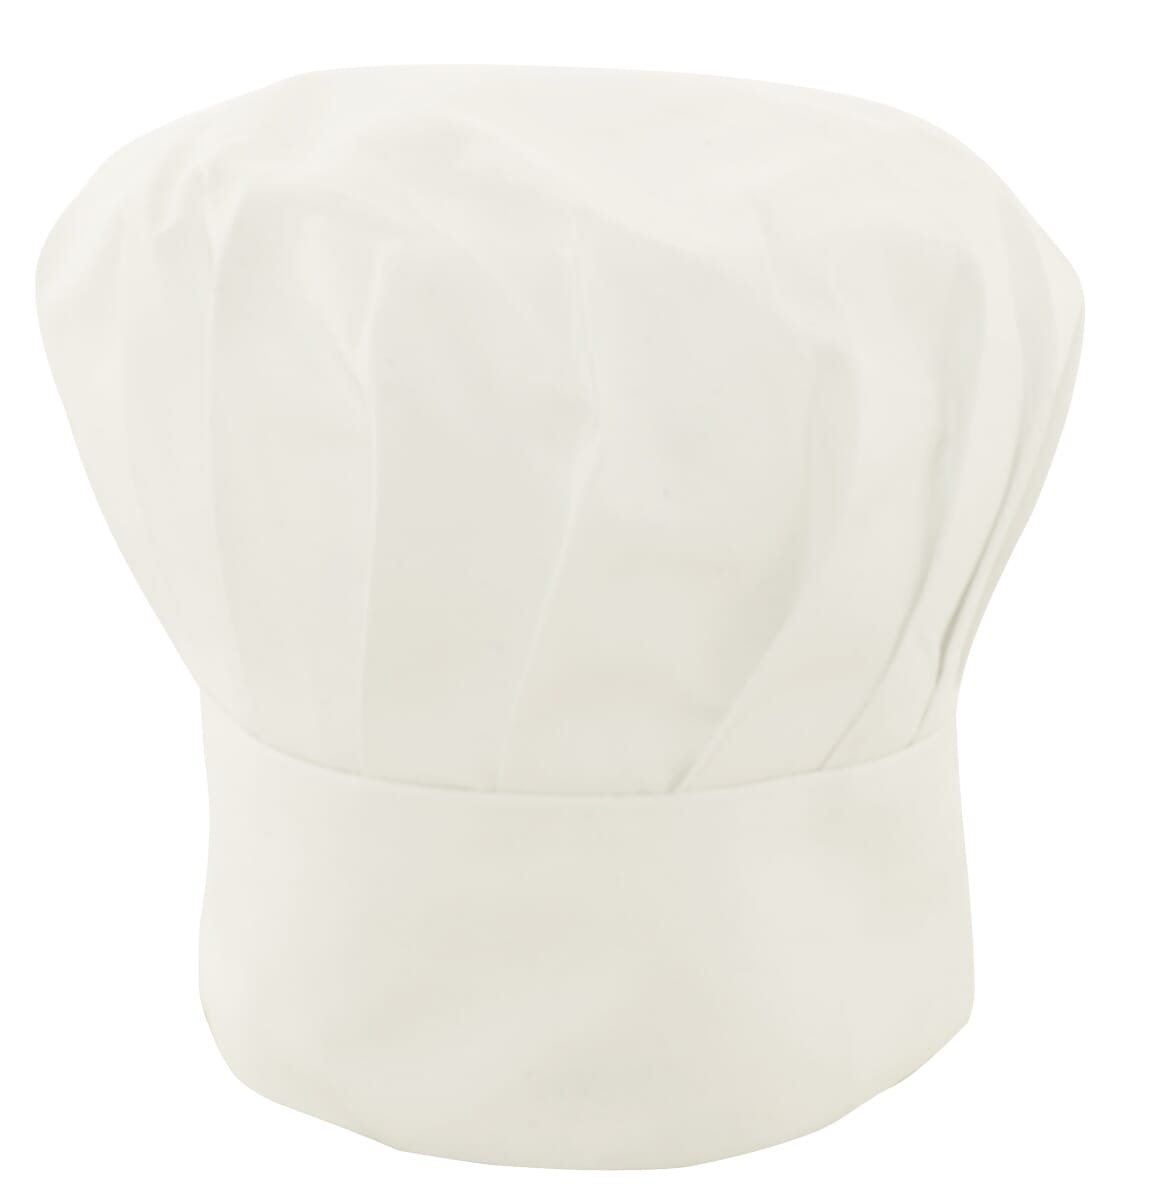 A kid's chef hat that can be personalized with a name - Titchfield - Saint Albans